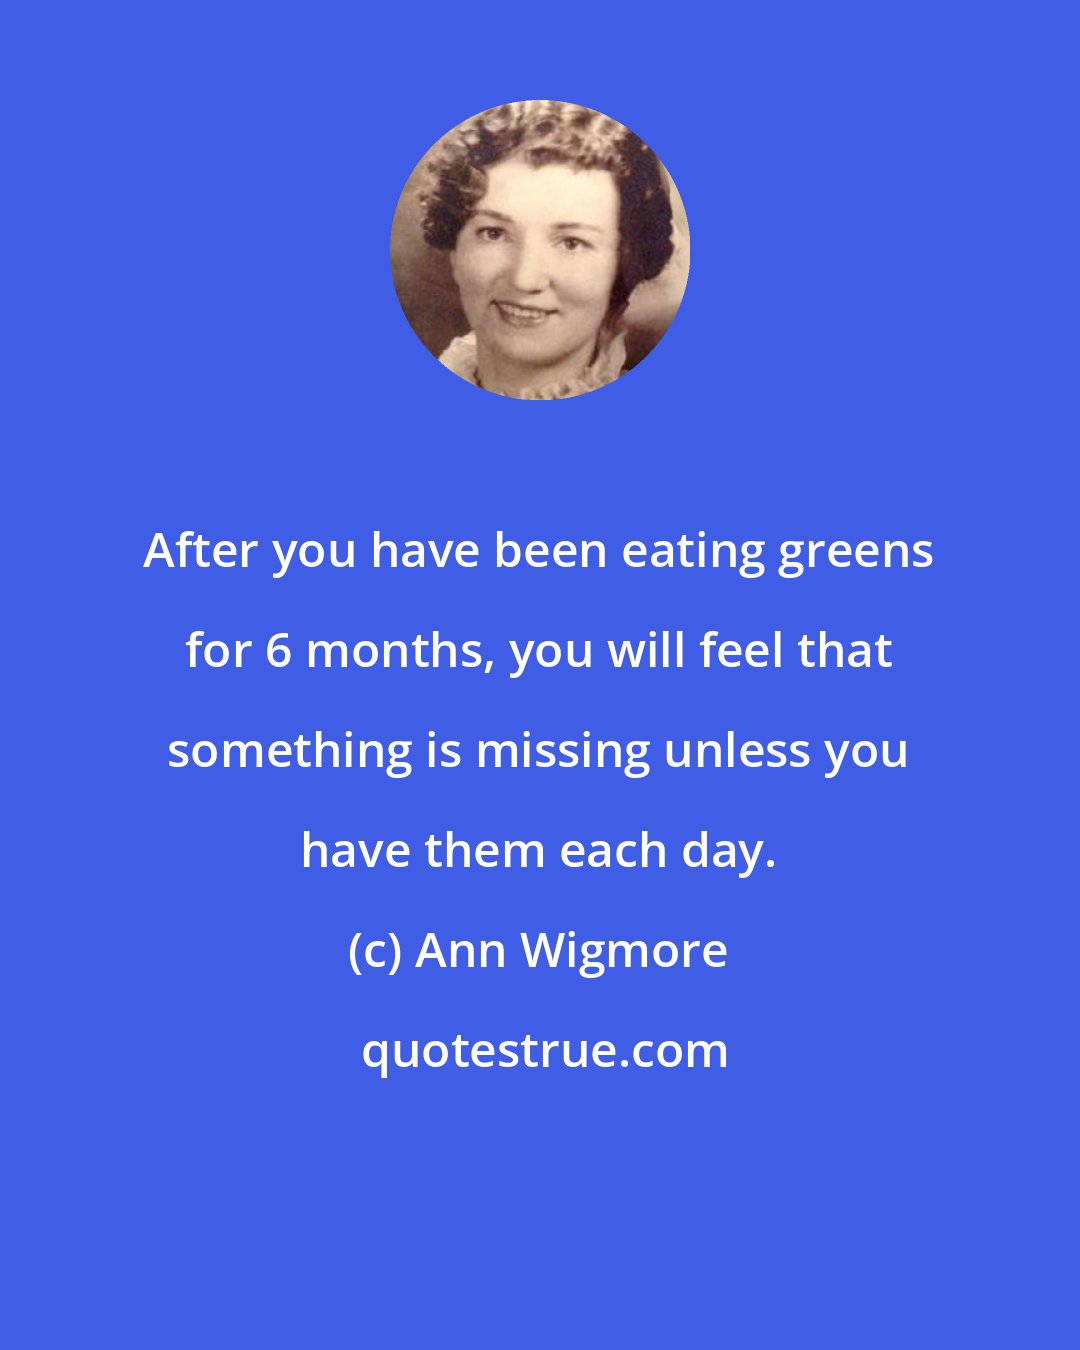 Ann Wigmore: After you have been eating greens for 6 months, you will feel that something is missing unless you have them each day.